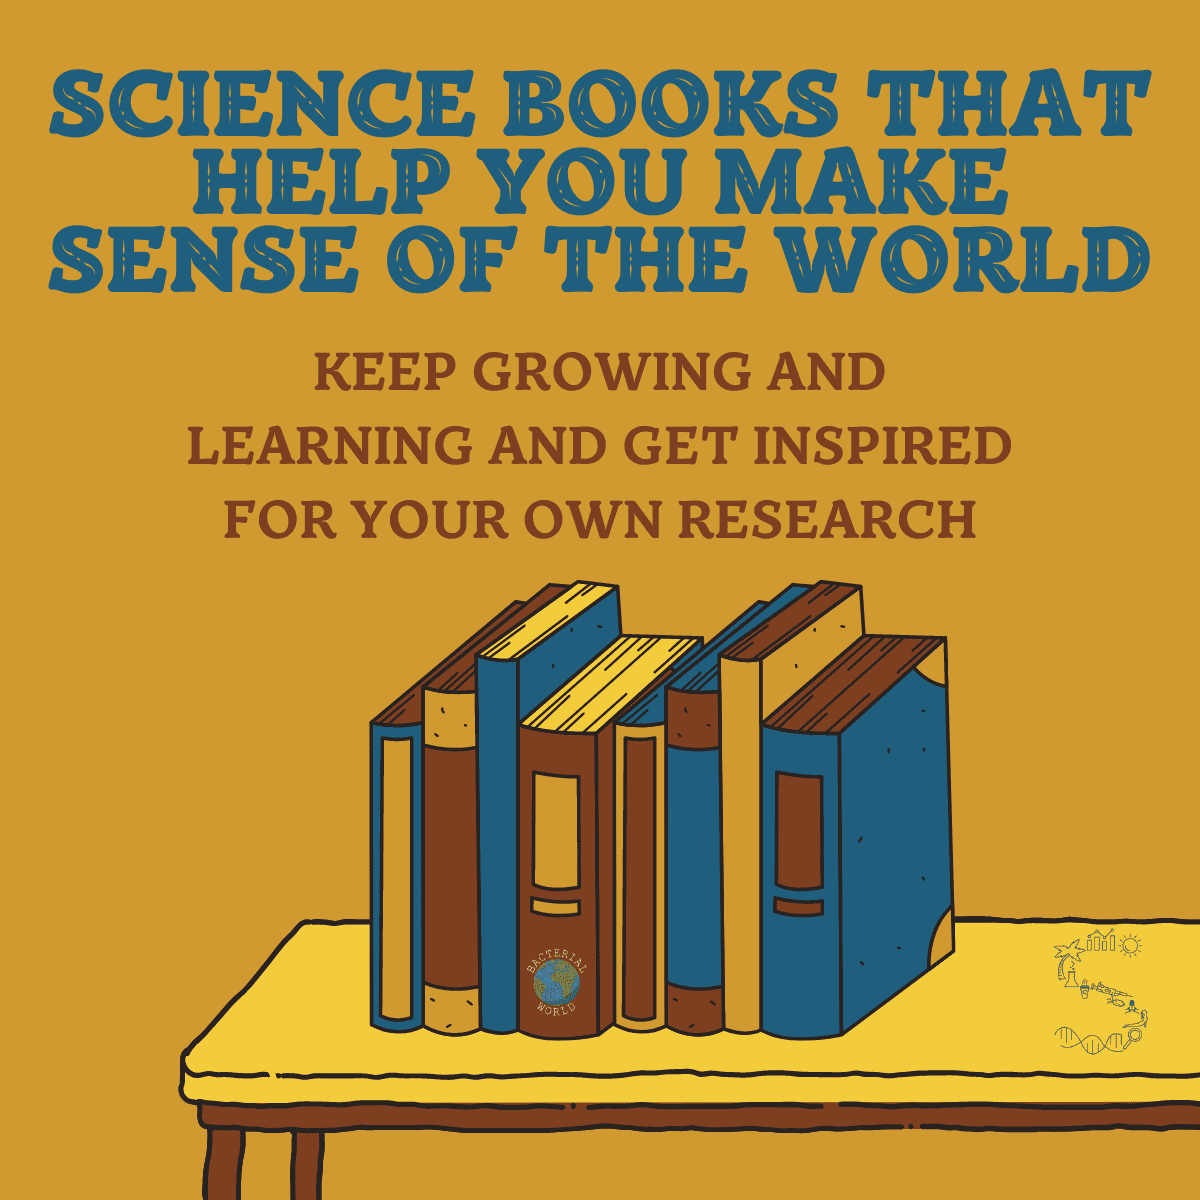 Science books that help you make sense of the world